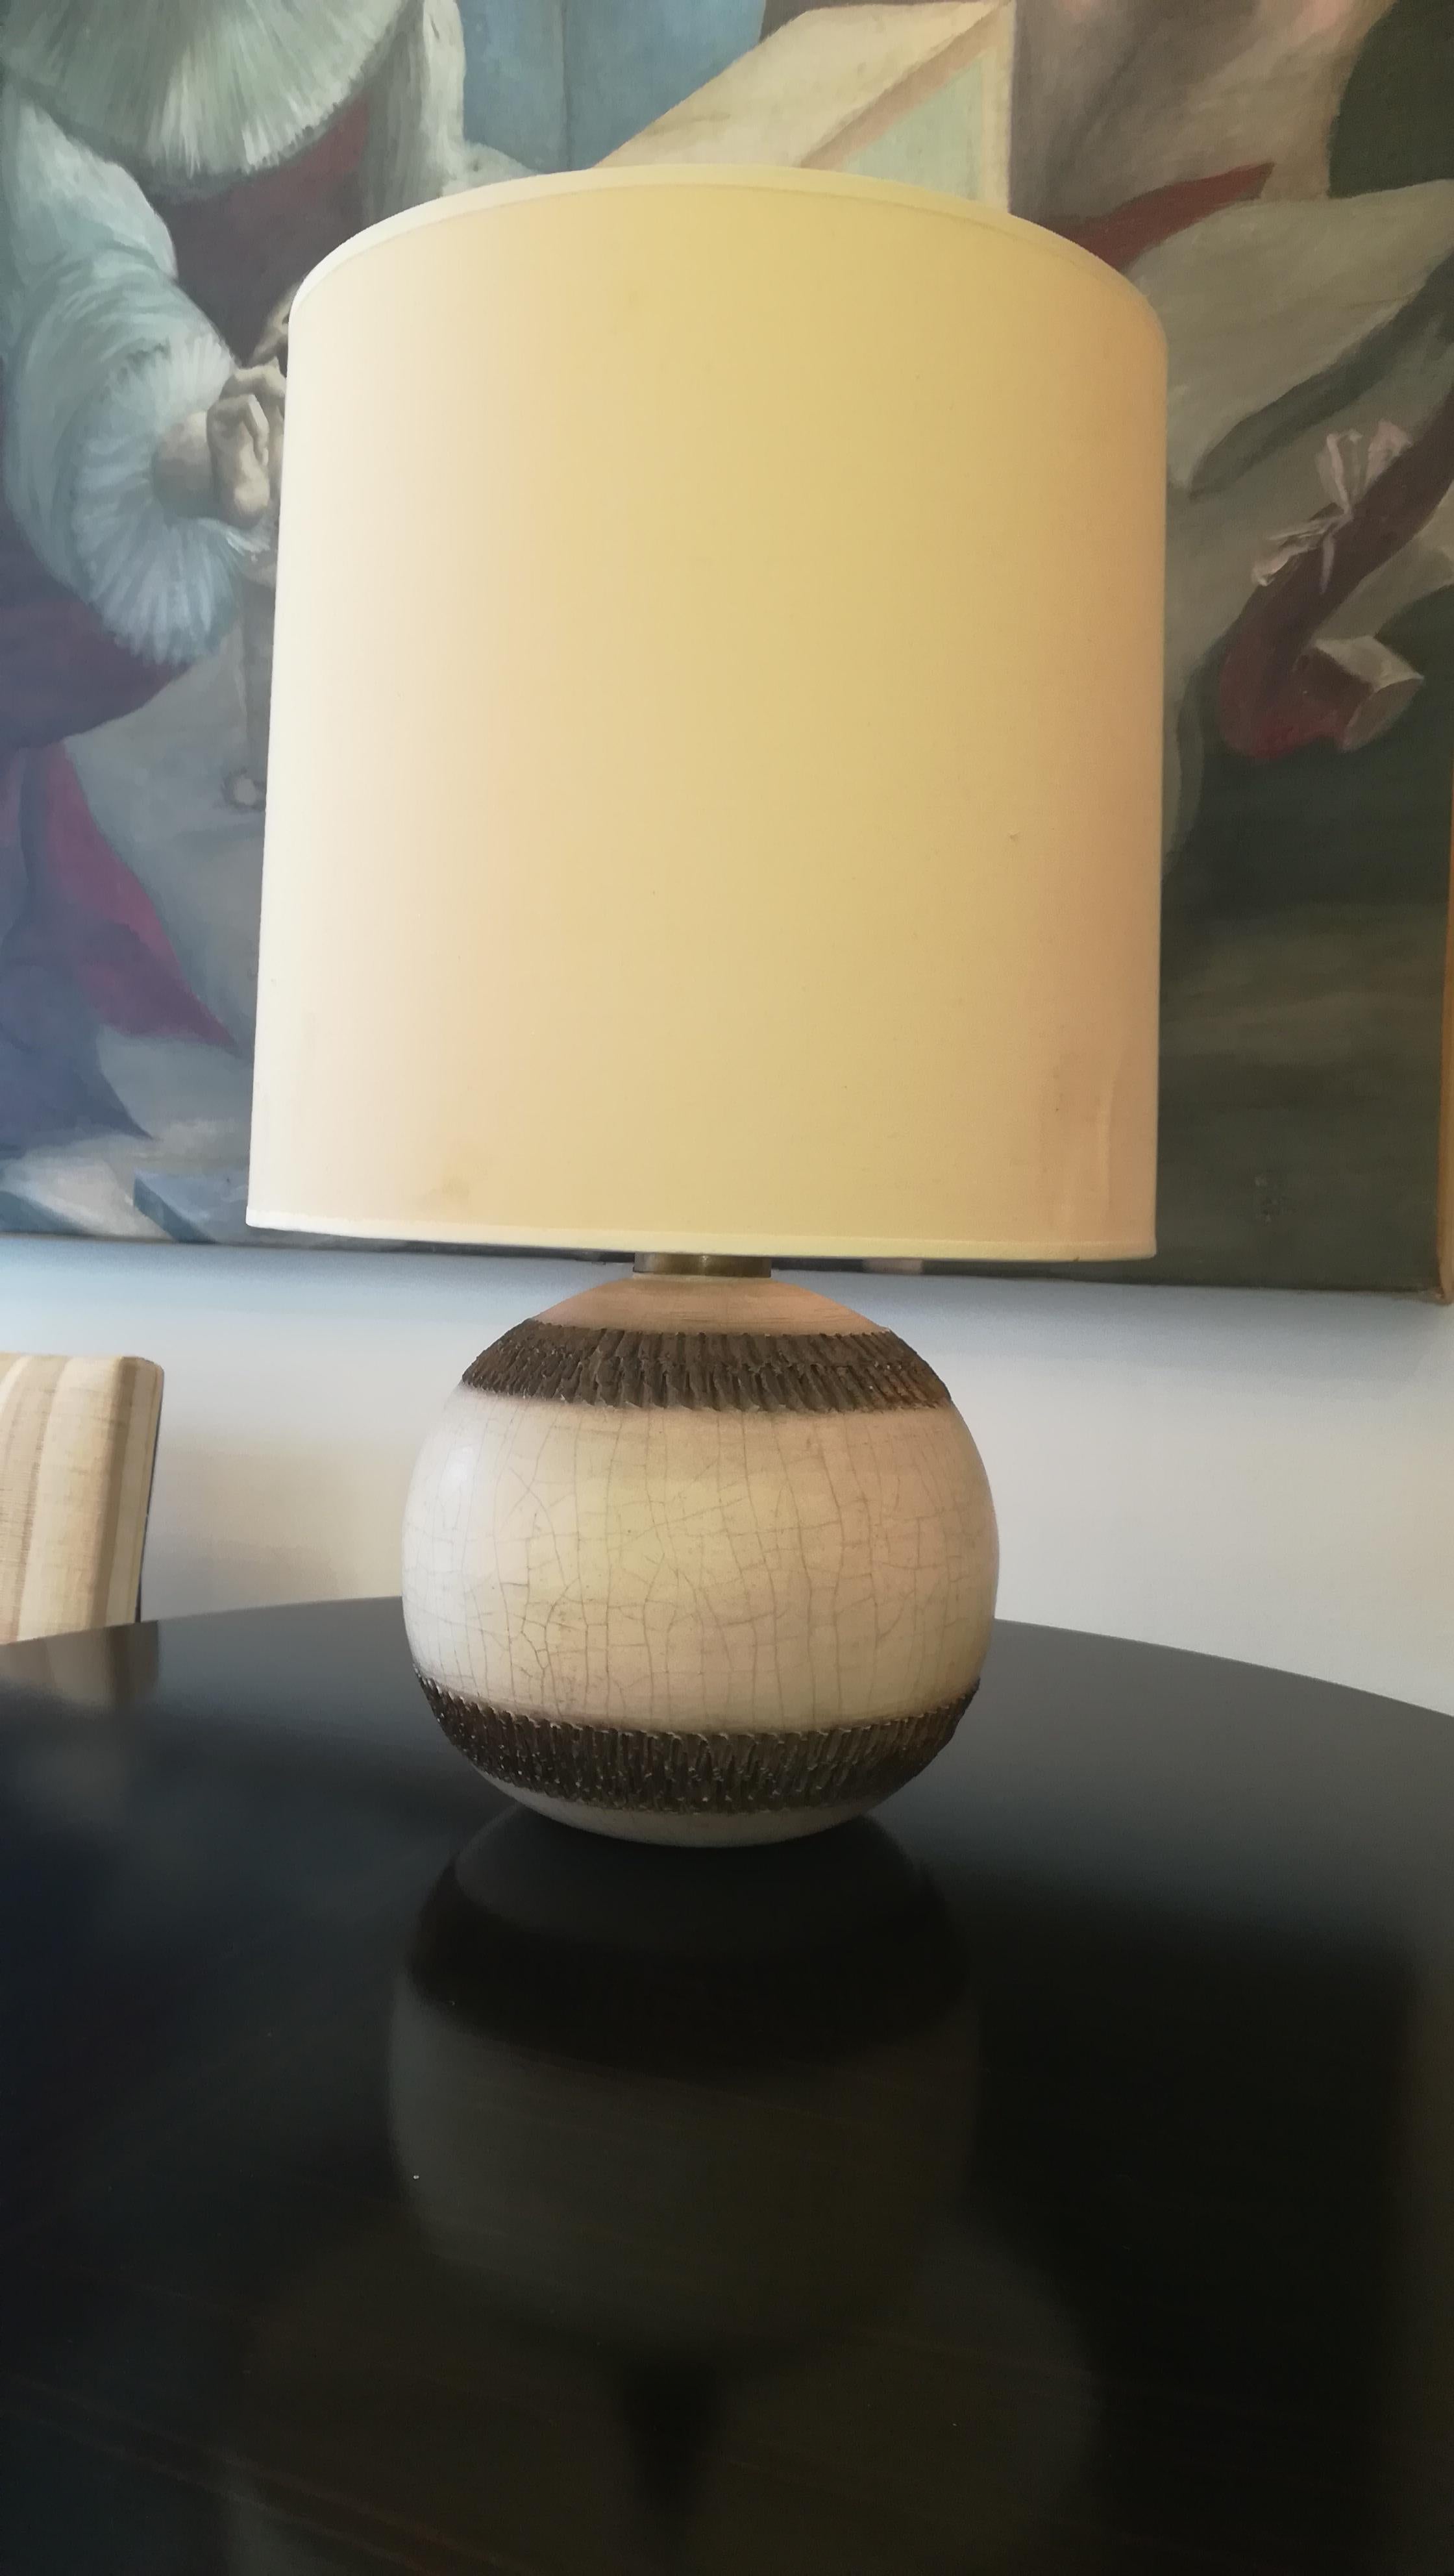 French Jean Besnard Ceramic Table Lamp circa 1930, Signed